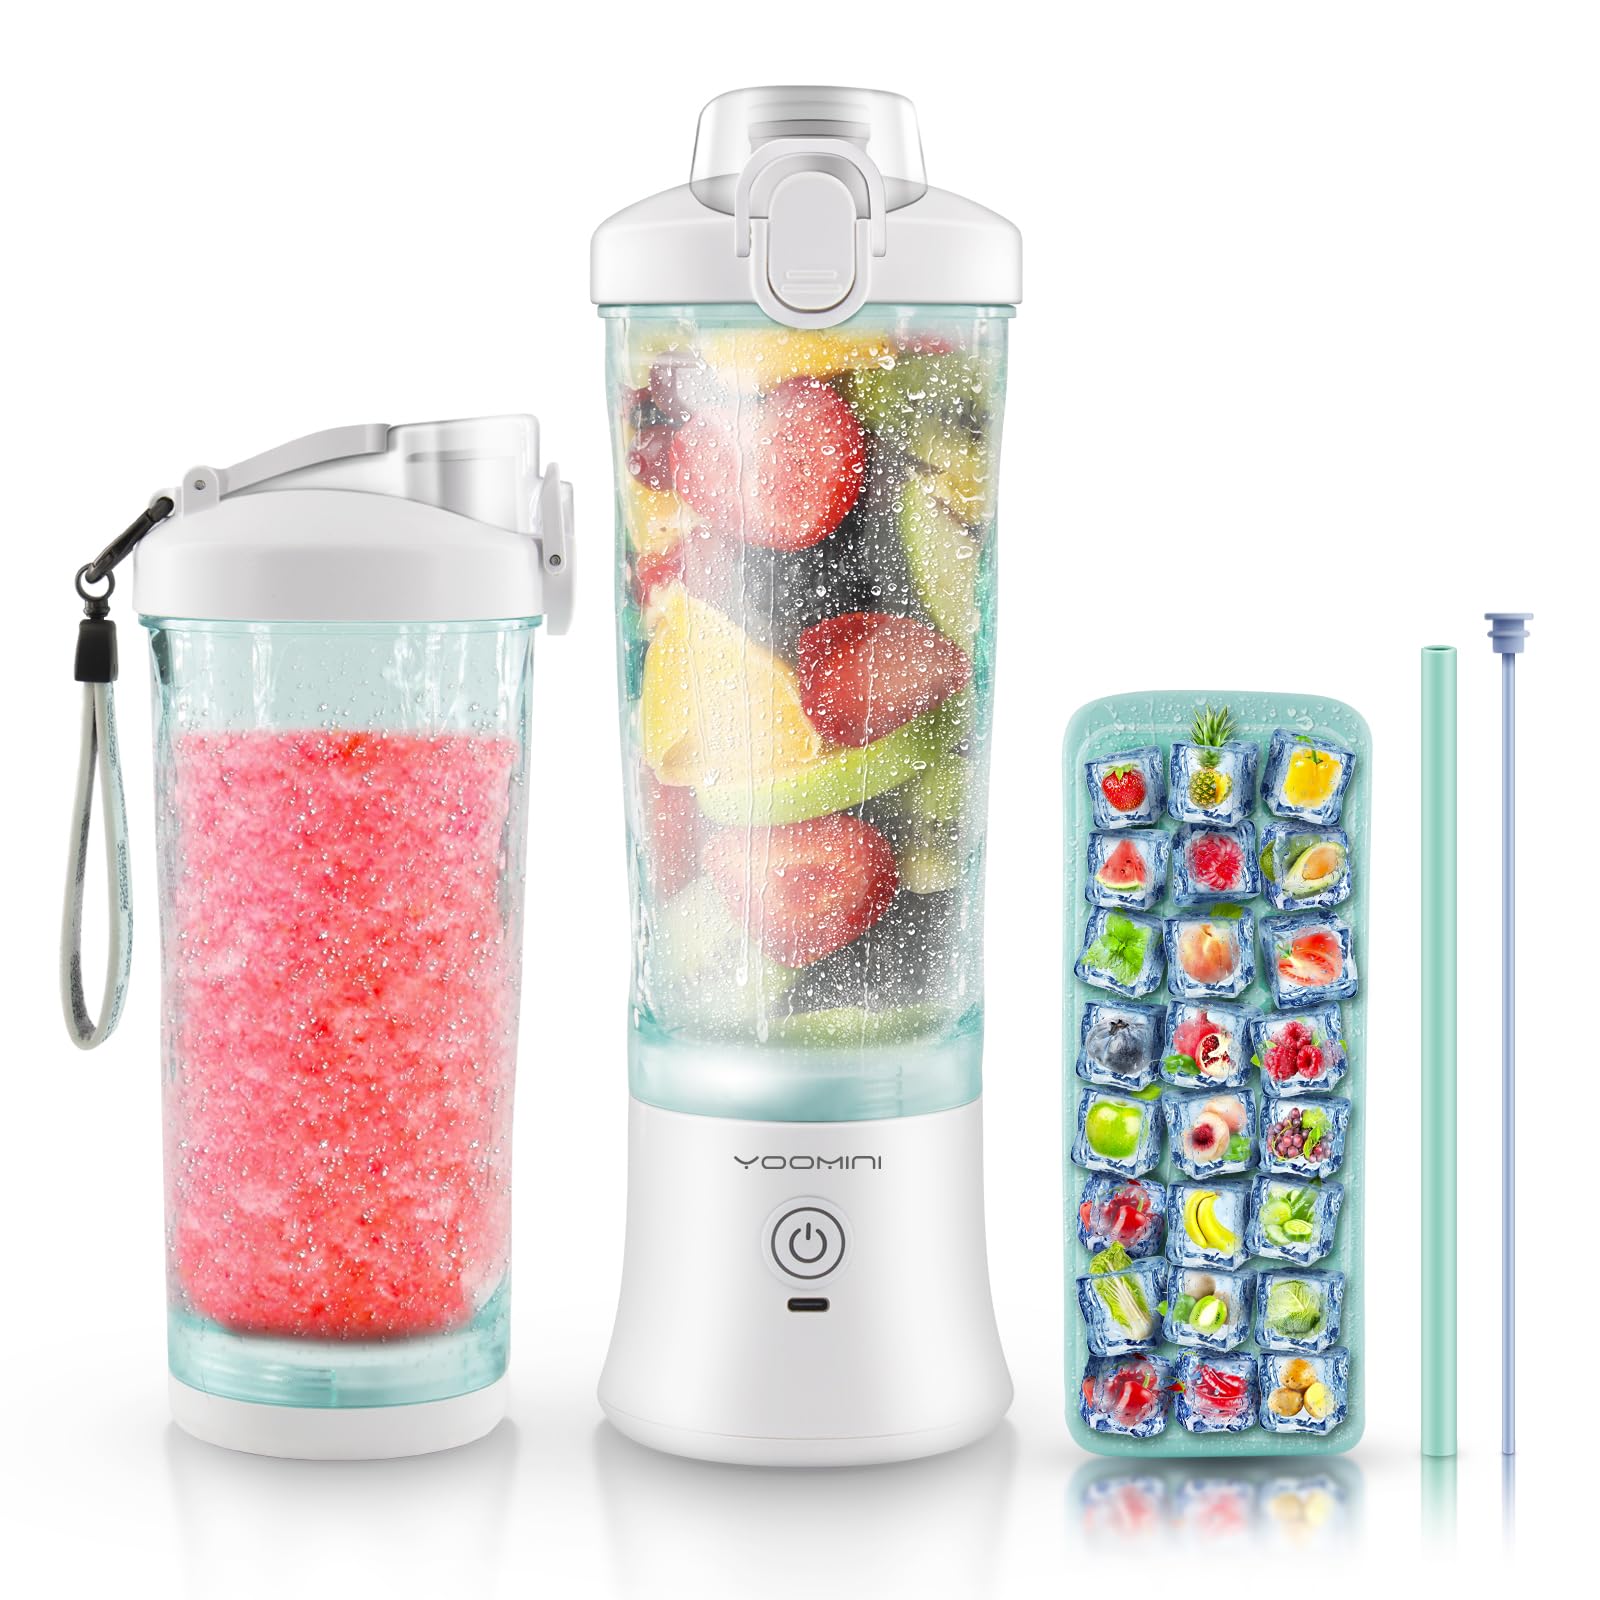 Portable Blender, Personal Size Blender for Shakes and Smoothies, 20 Oz  Cup, Waterproof Mini Blender With Rechargeable USB, Juicer with 6 Blades  for